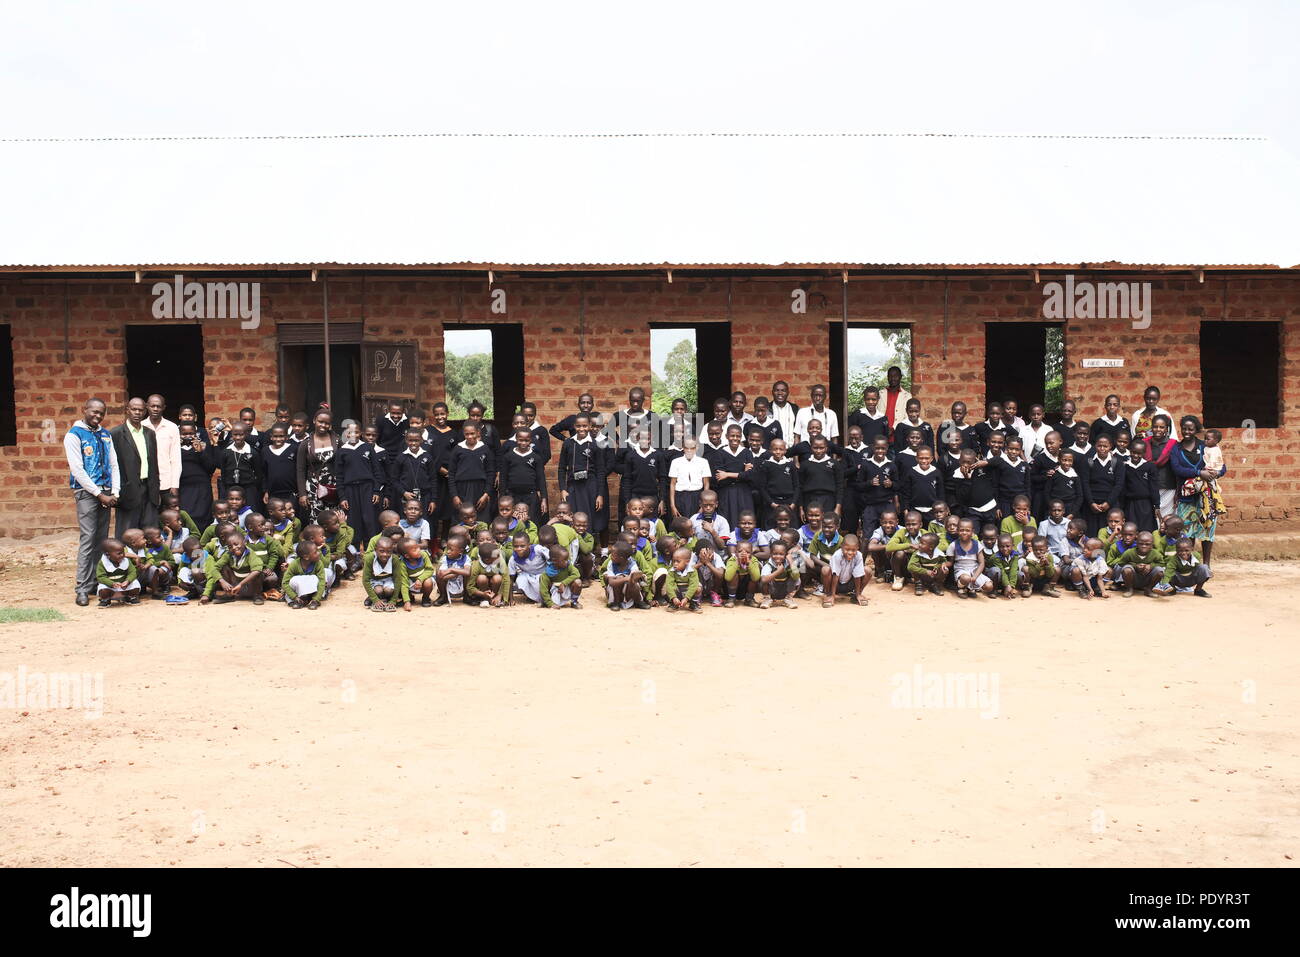 large group photo of a small ugandan school posing with teachers for school photo Stock Photo